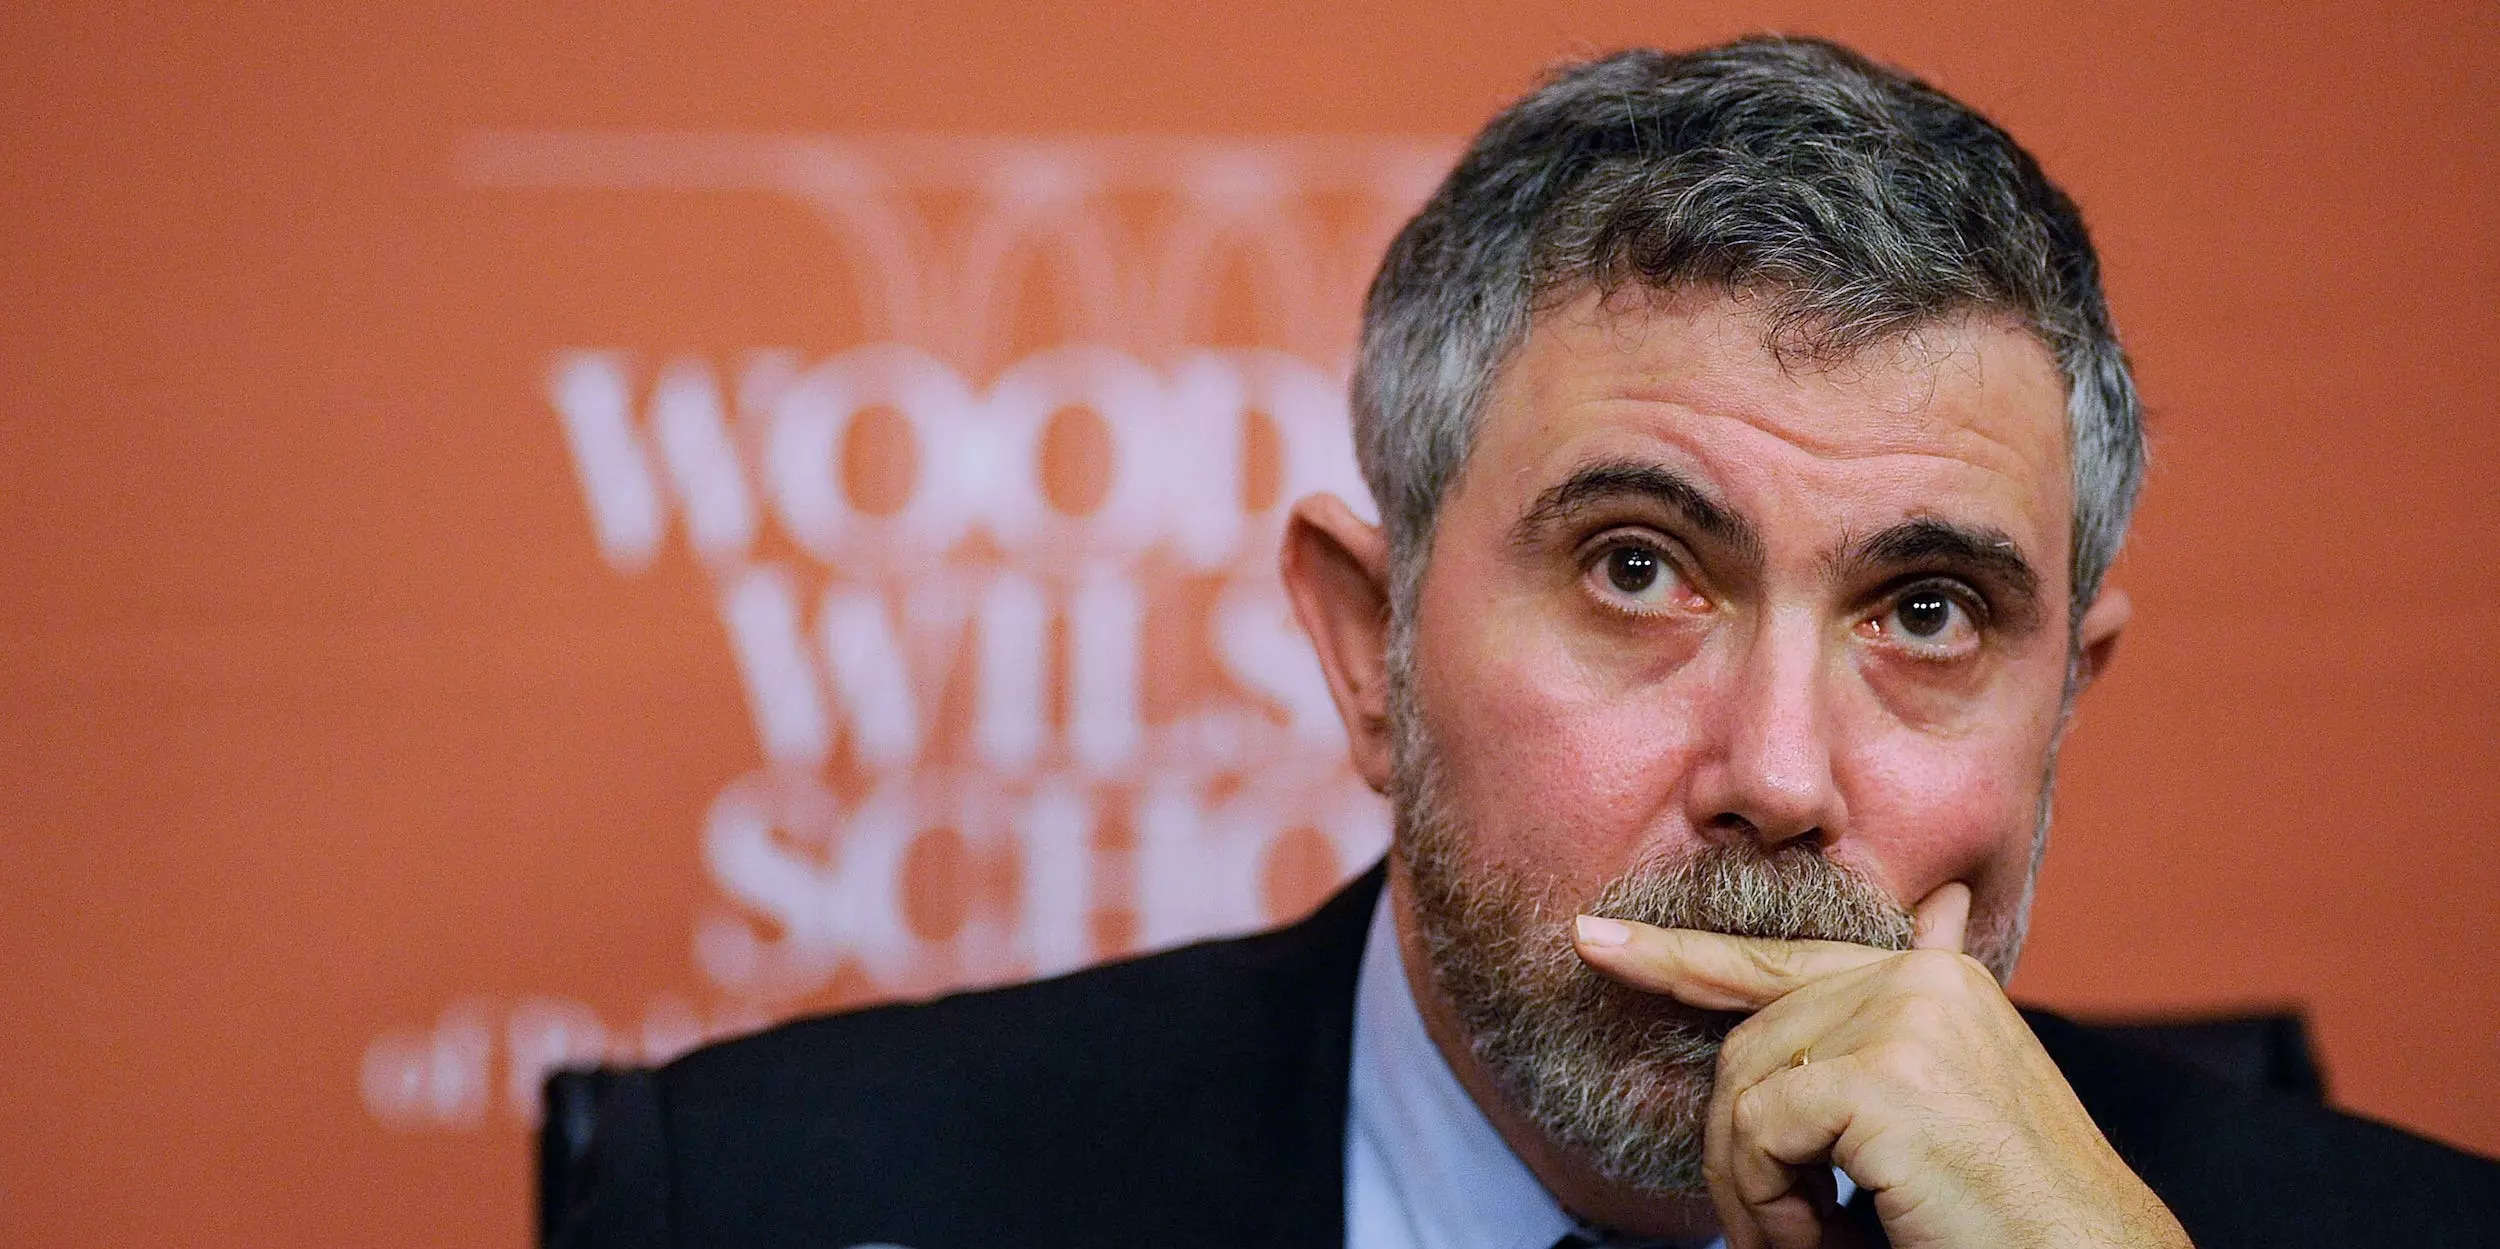 Paul Krugman, Mohamed El-Erian and Nouriel Roubini take a dig at British leaders whose spending plans have roiled markets.  Here’s what 3 leading economists had to say.